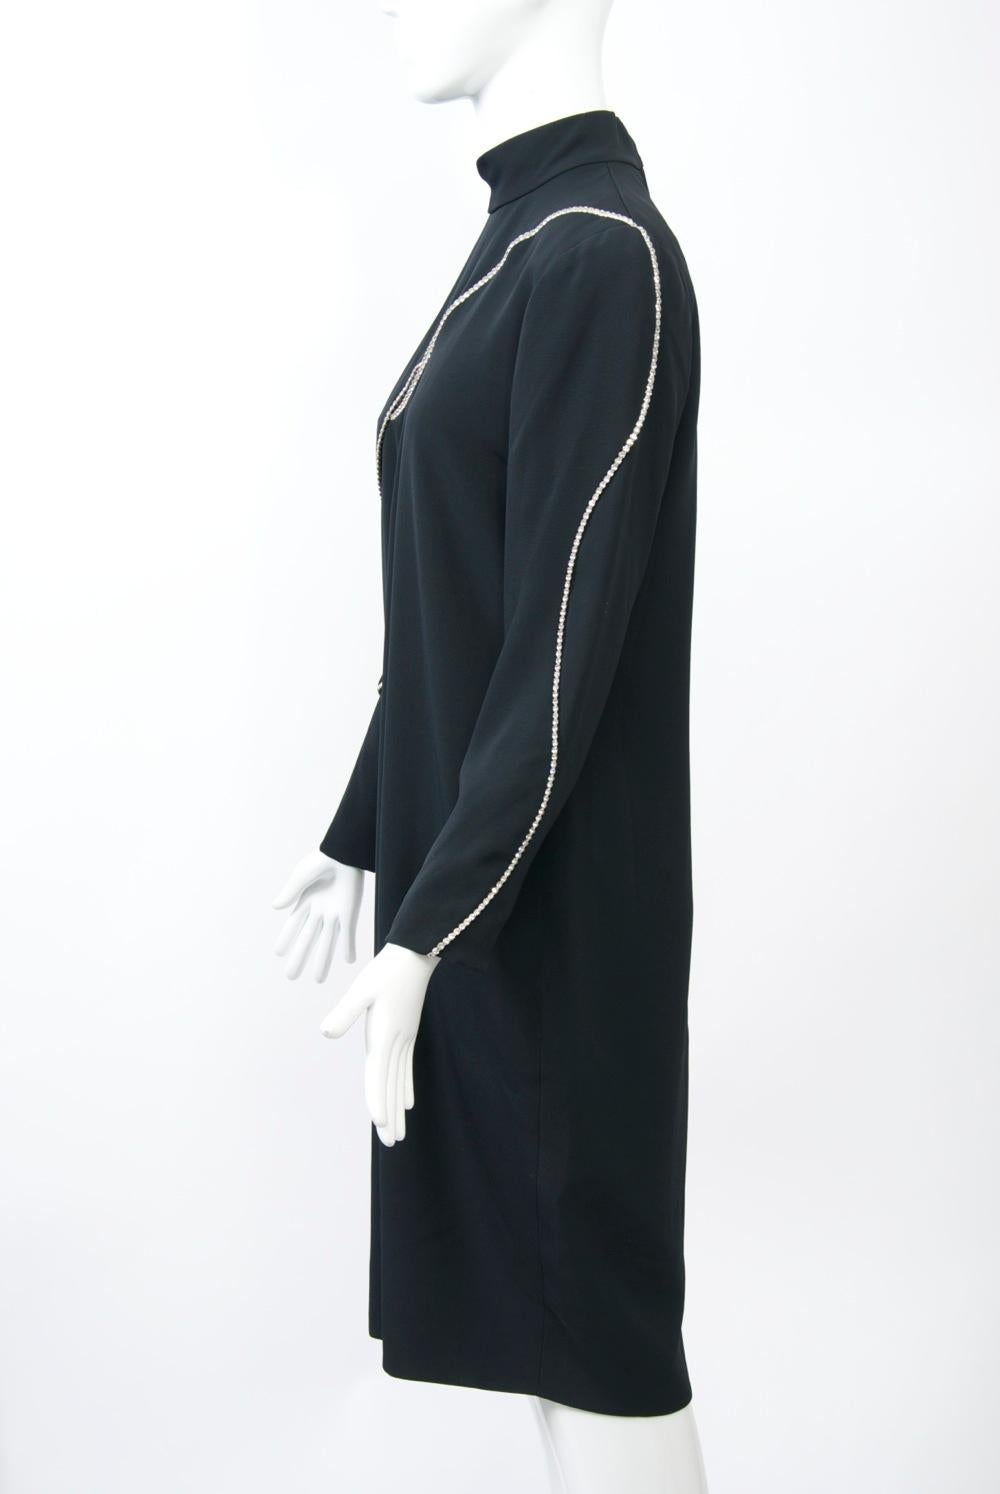 Cyreld Black Cocktail Dress with Rhinestone Trim In Excellent Condition For Sale In Alford, MA